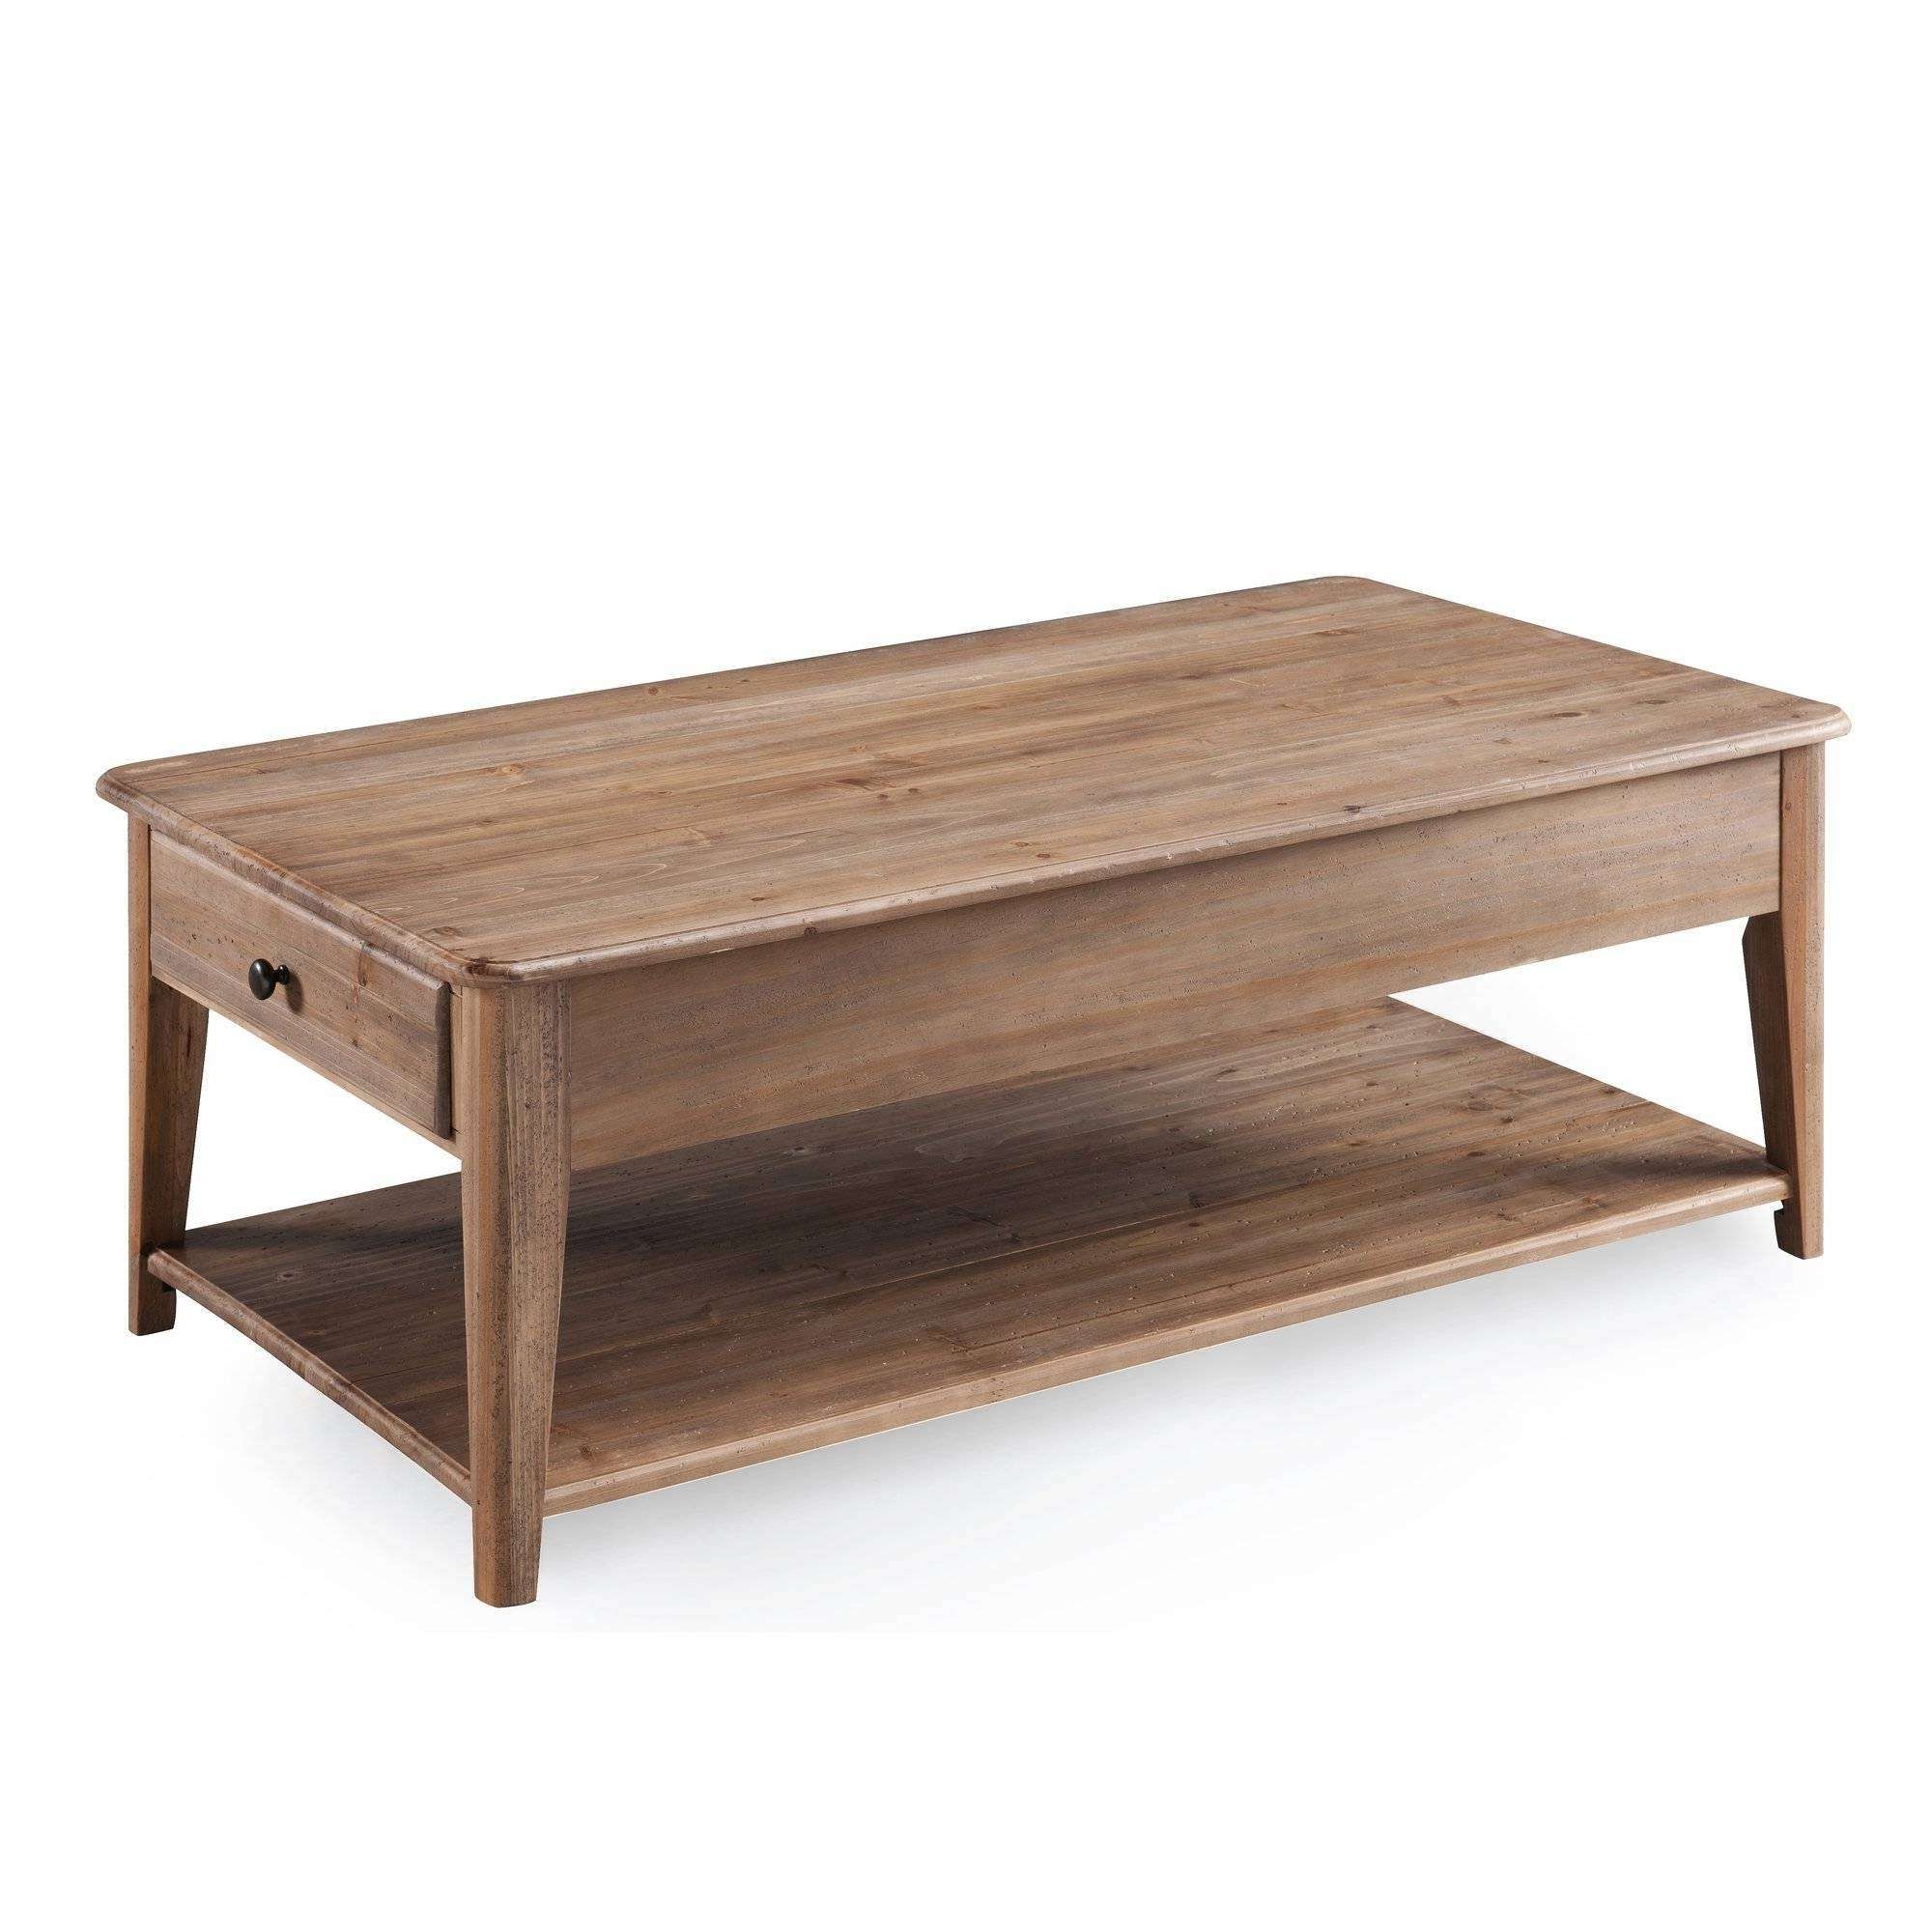 Collection Waverly Lift Top Coffee Table – Mediasupload For Recent Waverly Lift Top Coffee Tables (View 11 of 20)